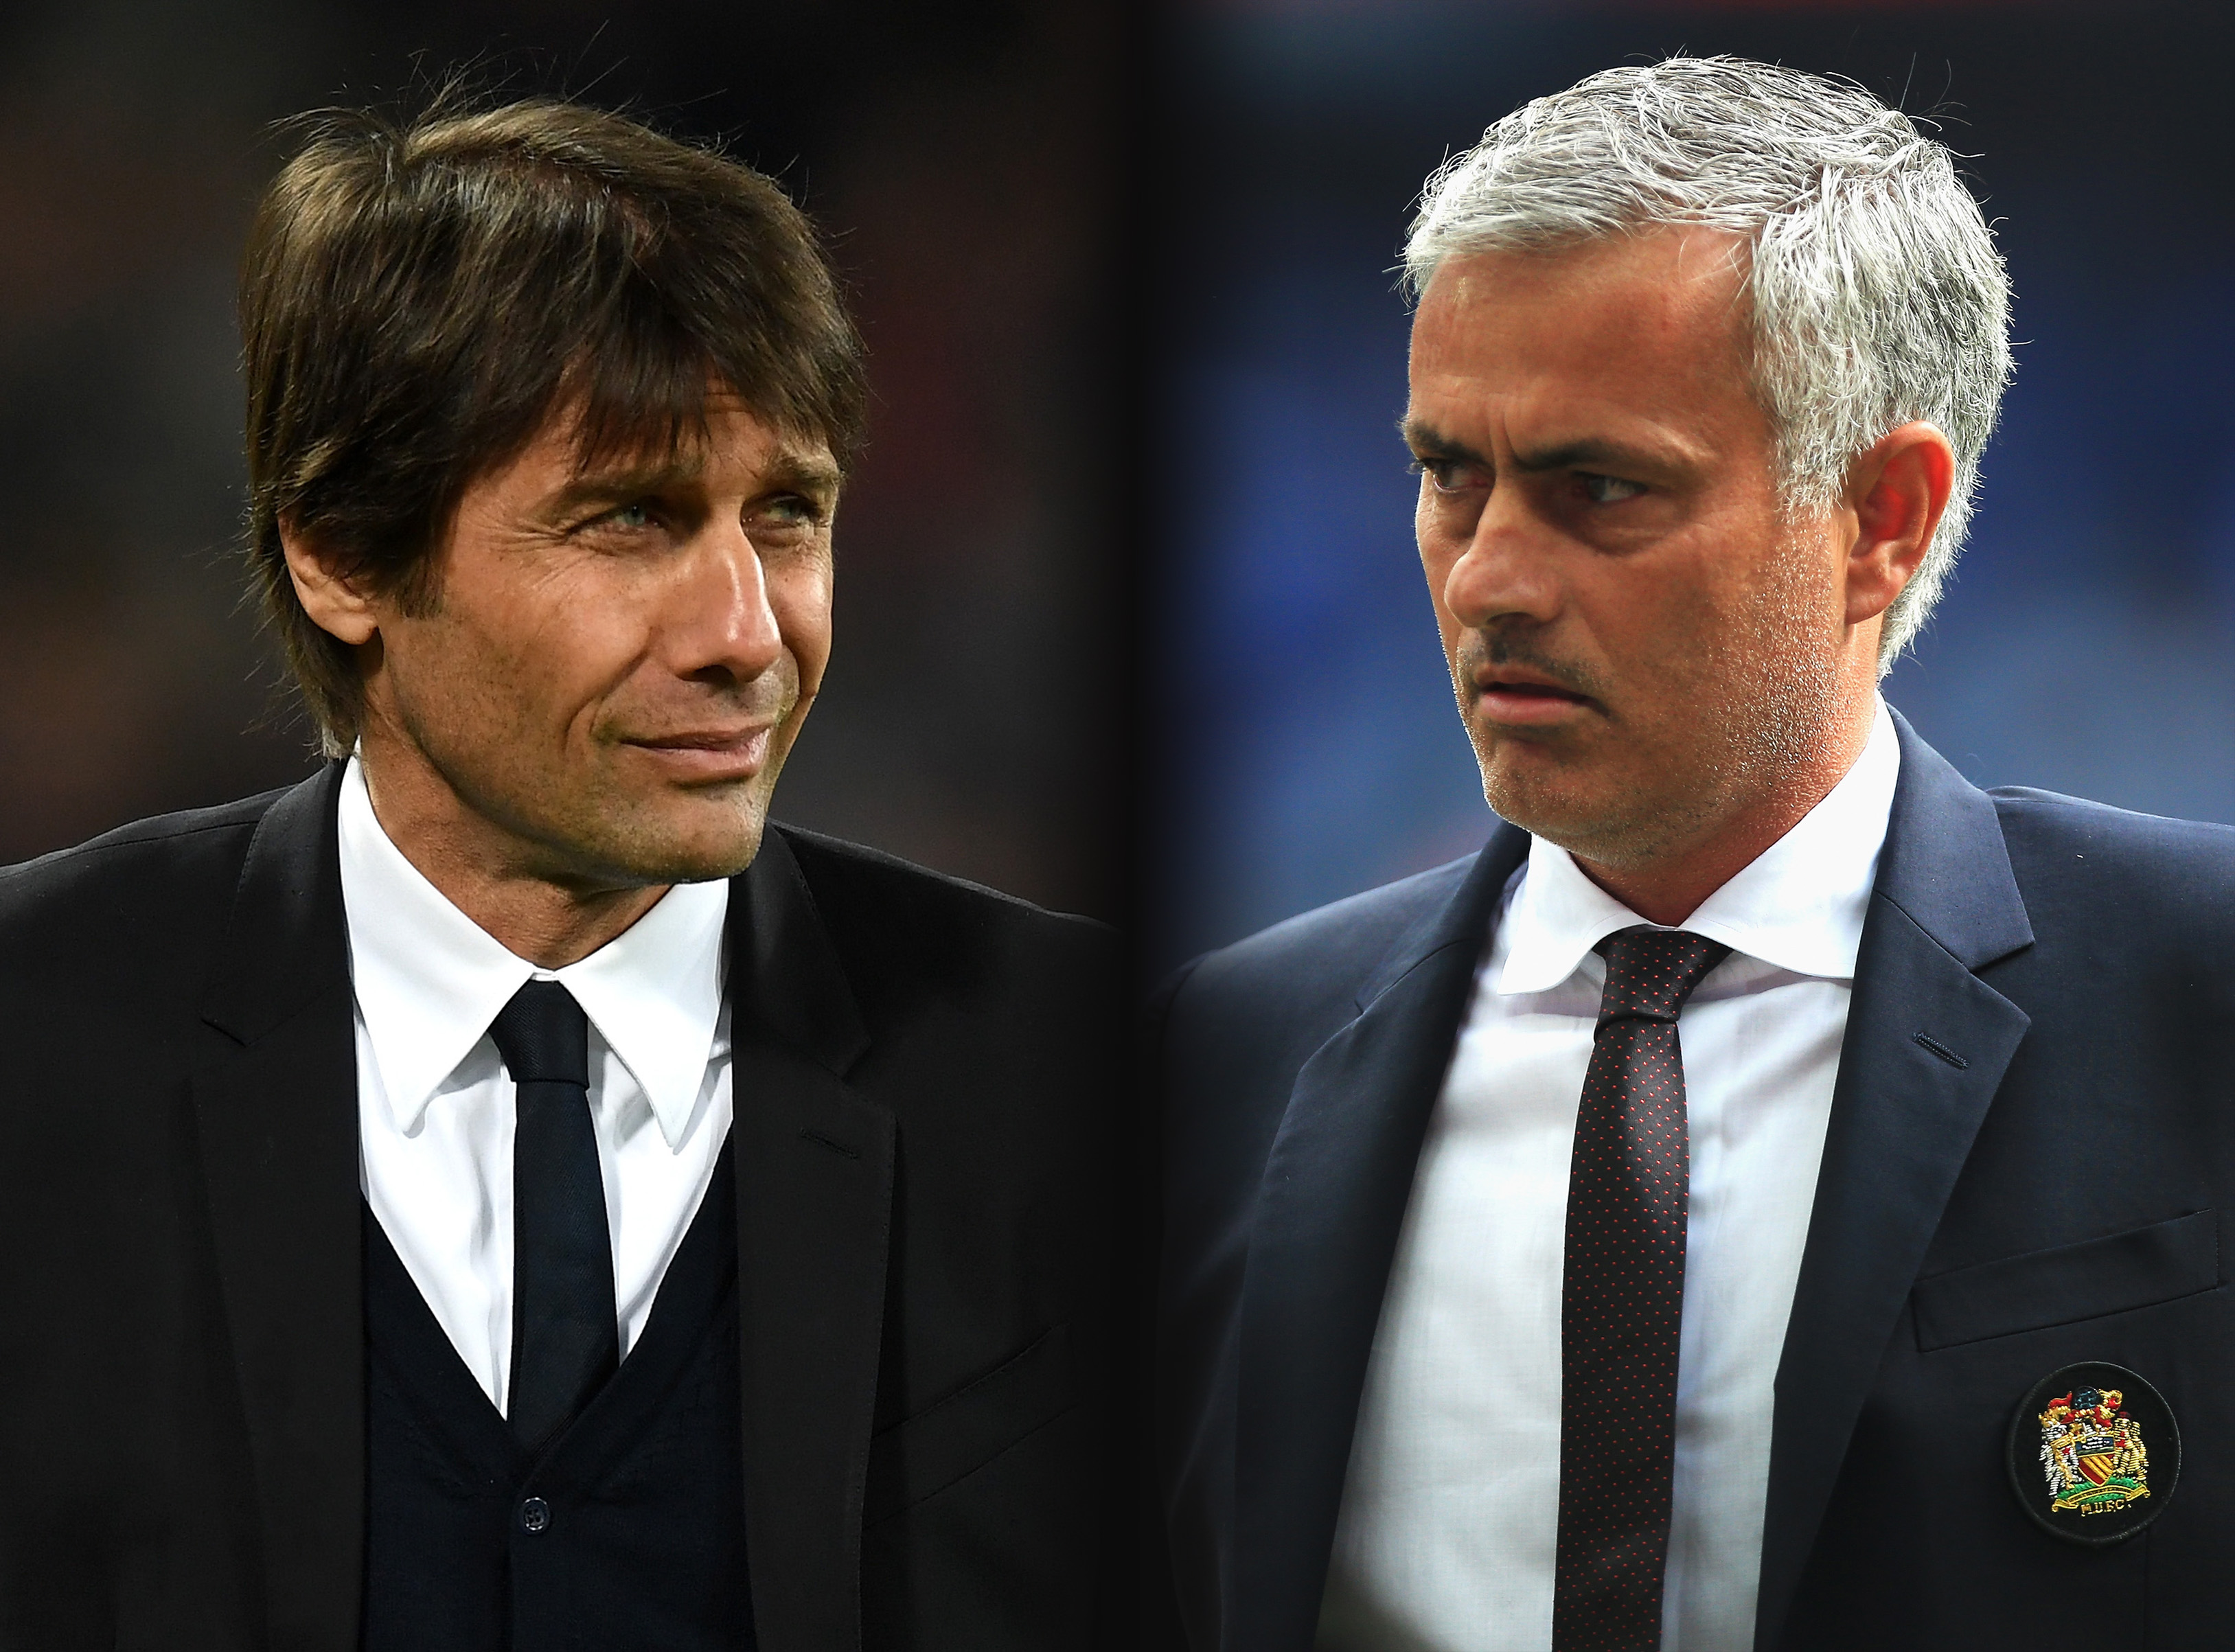 FILE PHOTO (EDITORS NOTE: GRADIENT ADDED - COMPOSITE OF TWO IMAGES - Image numbers (L) 648790058 and 586900360) In this composite image a comparision has been made between  Antonio Conte, Manager of Chelsea and Jose Mourinho,Manager of Manchester United. Chelsea and Manchester United meet in one of the  Emirates FA Cup Quarter-Finals at Stamford Bridge on March 13, 2017 in London,England.   ***LEFT IMAGE*** STRATFORD, ENGLAND - MARCH 06: Antonio Conte, Manager of Chelsea looks on during the Premier League match between West Ham United and Chelsea at London Stadium on March 6, 2017 in Stratford, England. (Photo by Michael Regan/Getty Images) ***RIGHT IMAGE*** LONDON, ENGLAND - AUGUST 07: Manager of Manchester United, Jose Mourinho watches on during The FA Community Shield match between Leicester City and Manchester United at Wembley Stadium on August 7, 2016 in London, England. (Photo by Ben Hoskins/Getty Images)